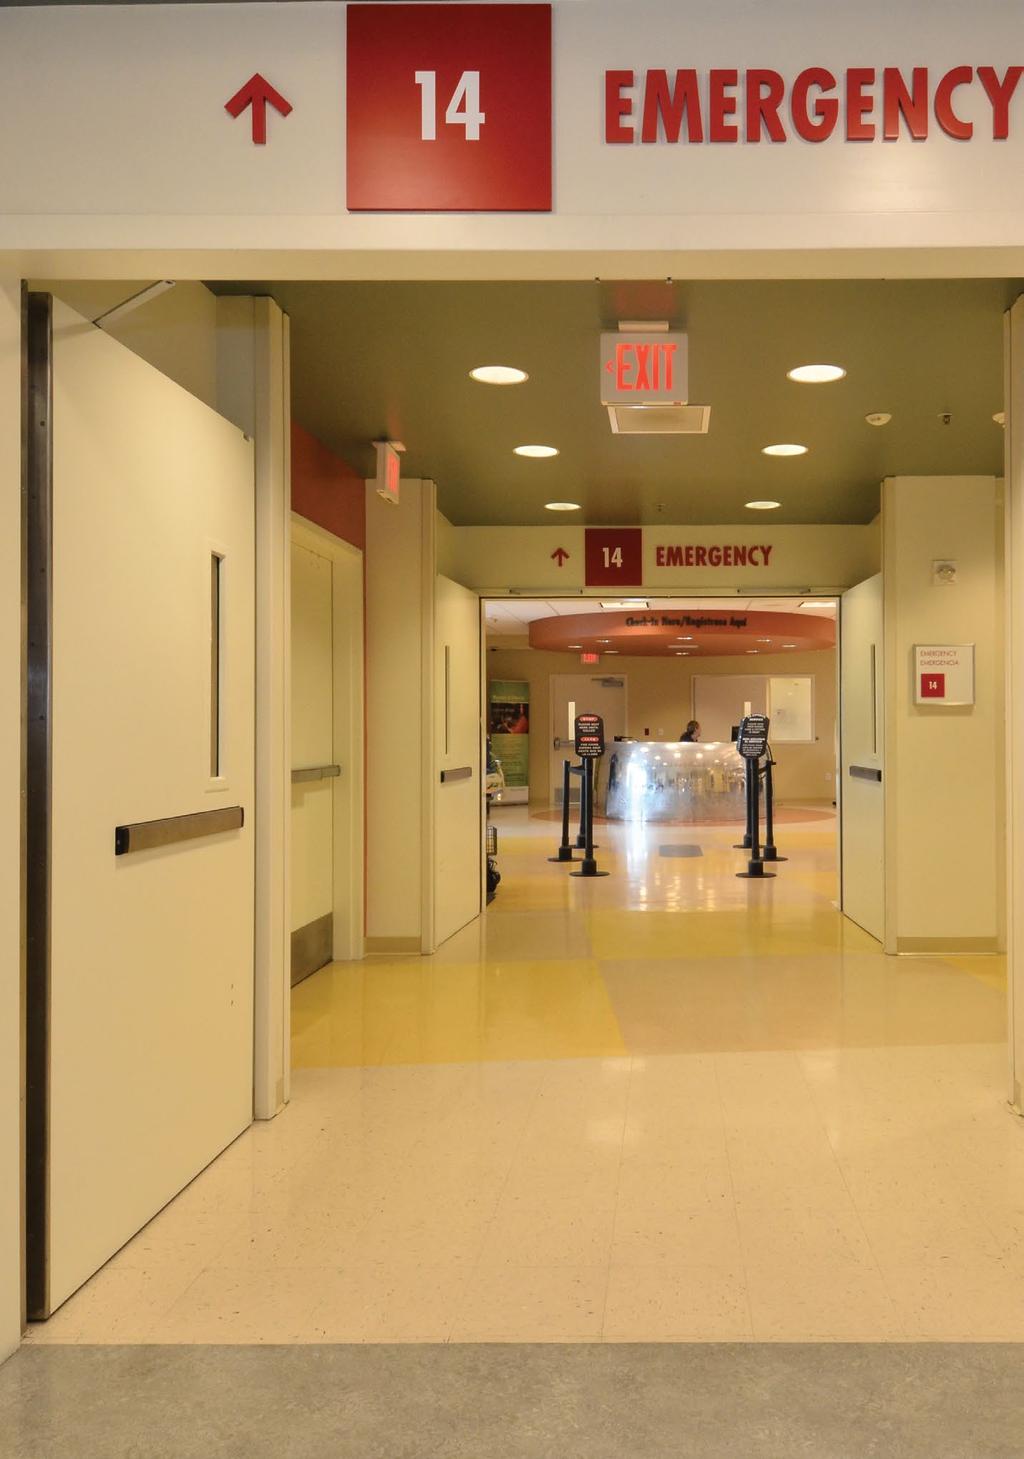 Doors & Frames Integrated Door Assembly With pocketed options and inset exit devices, The RITE Door provides clean sight lines and clear opening widths for healthcare facilities.